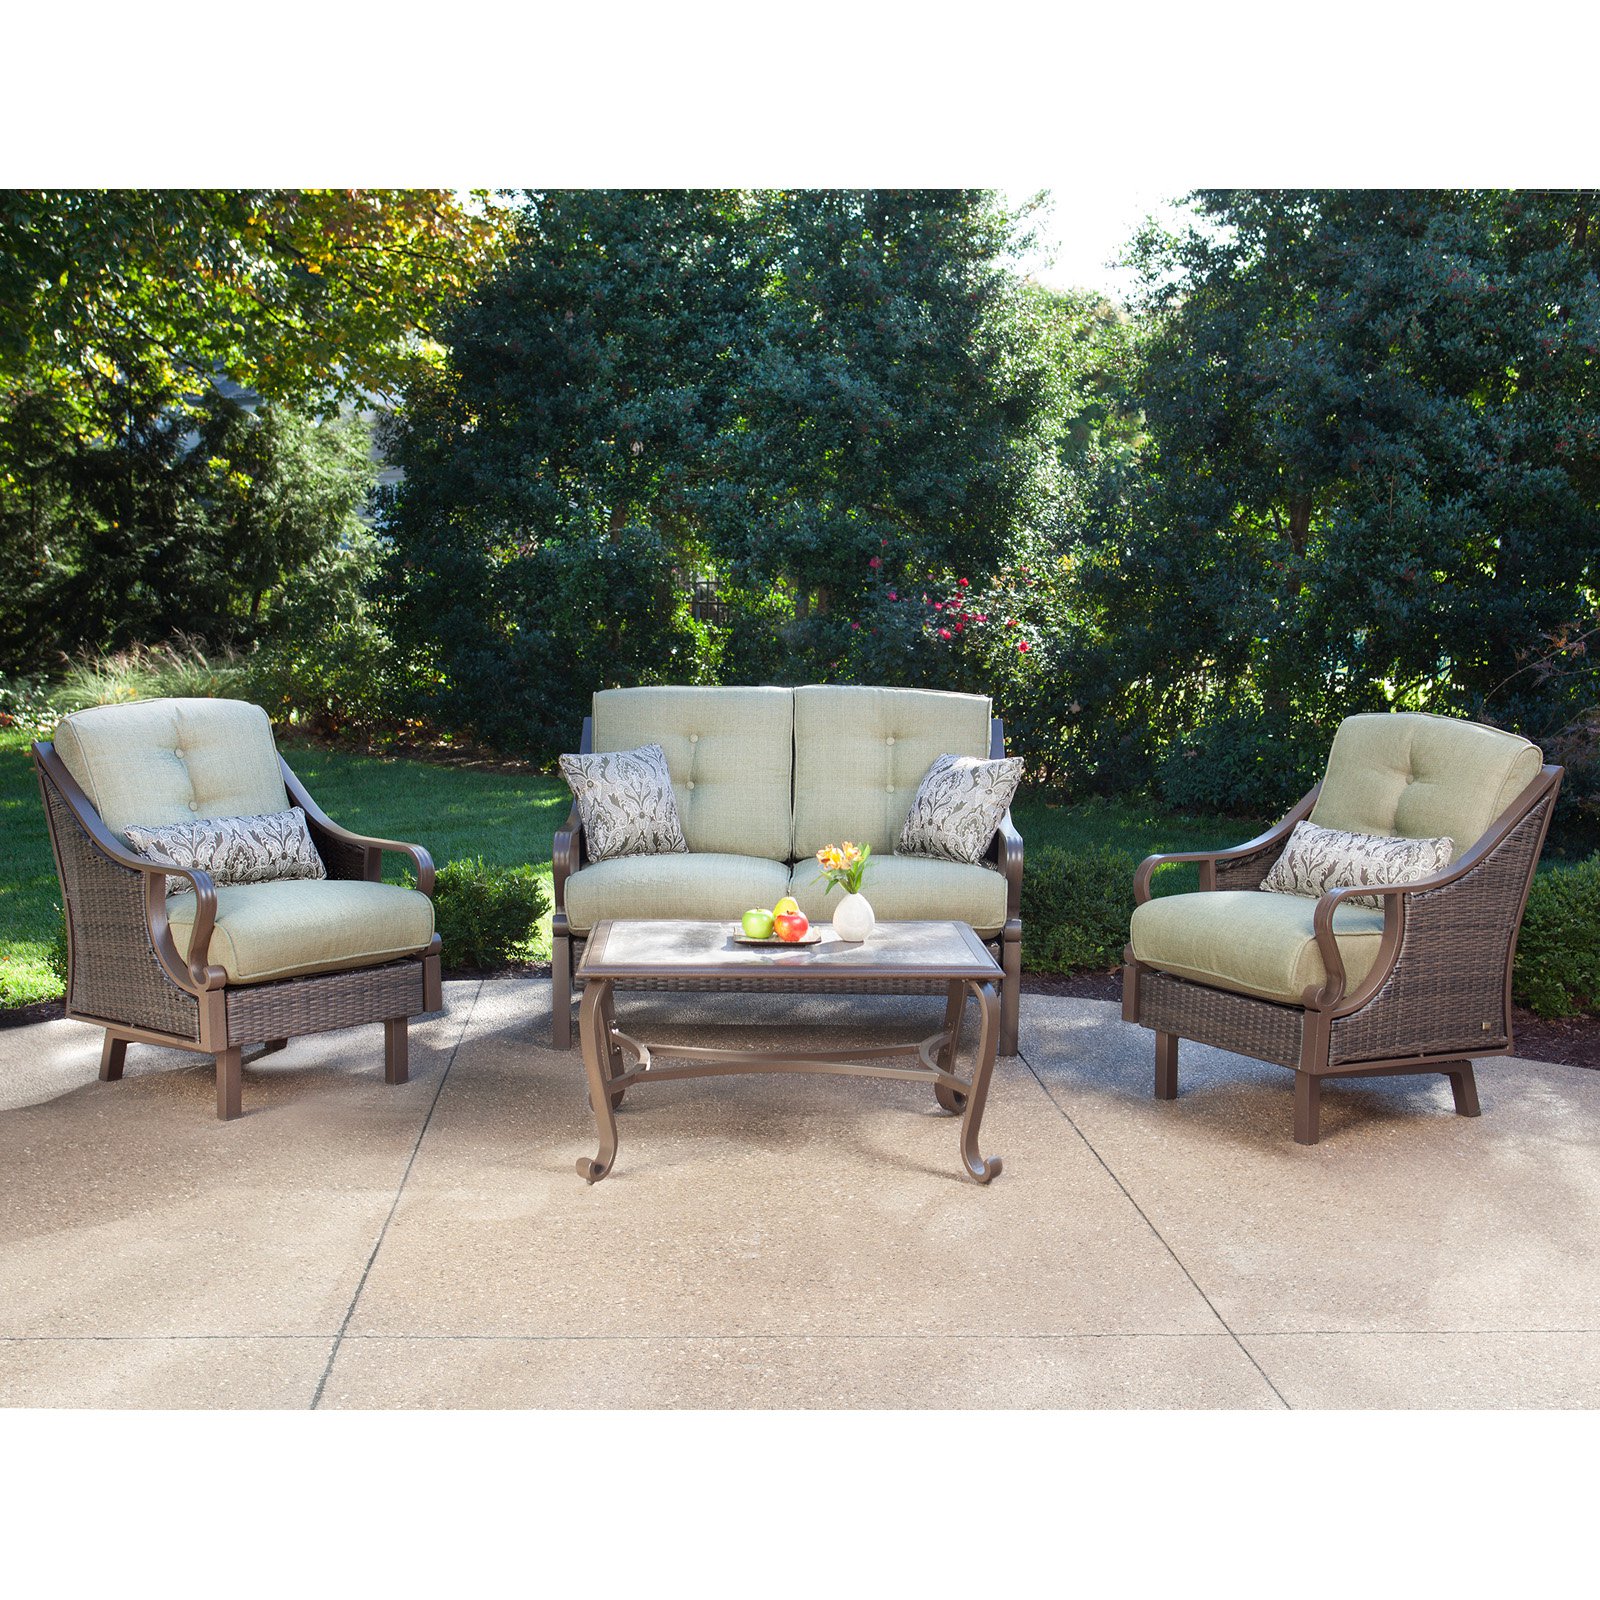 Hanover Ventura 4-Piece Outdoor Wicker Patio Set with Pillows, Mint - image 1 of 11